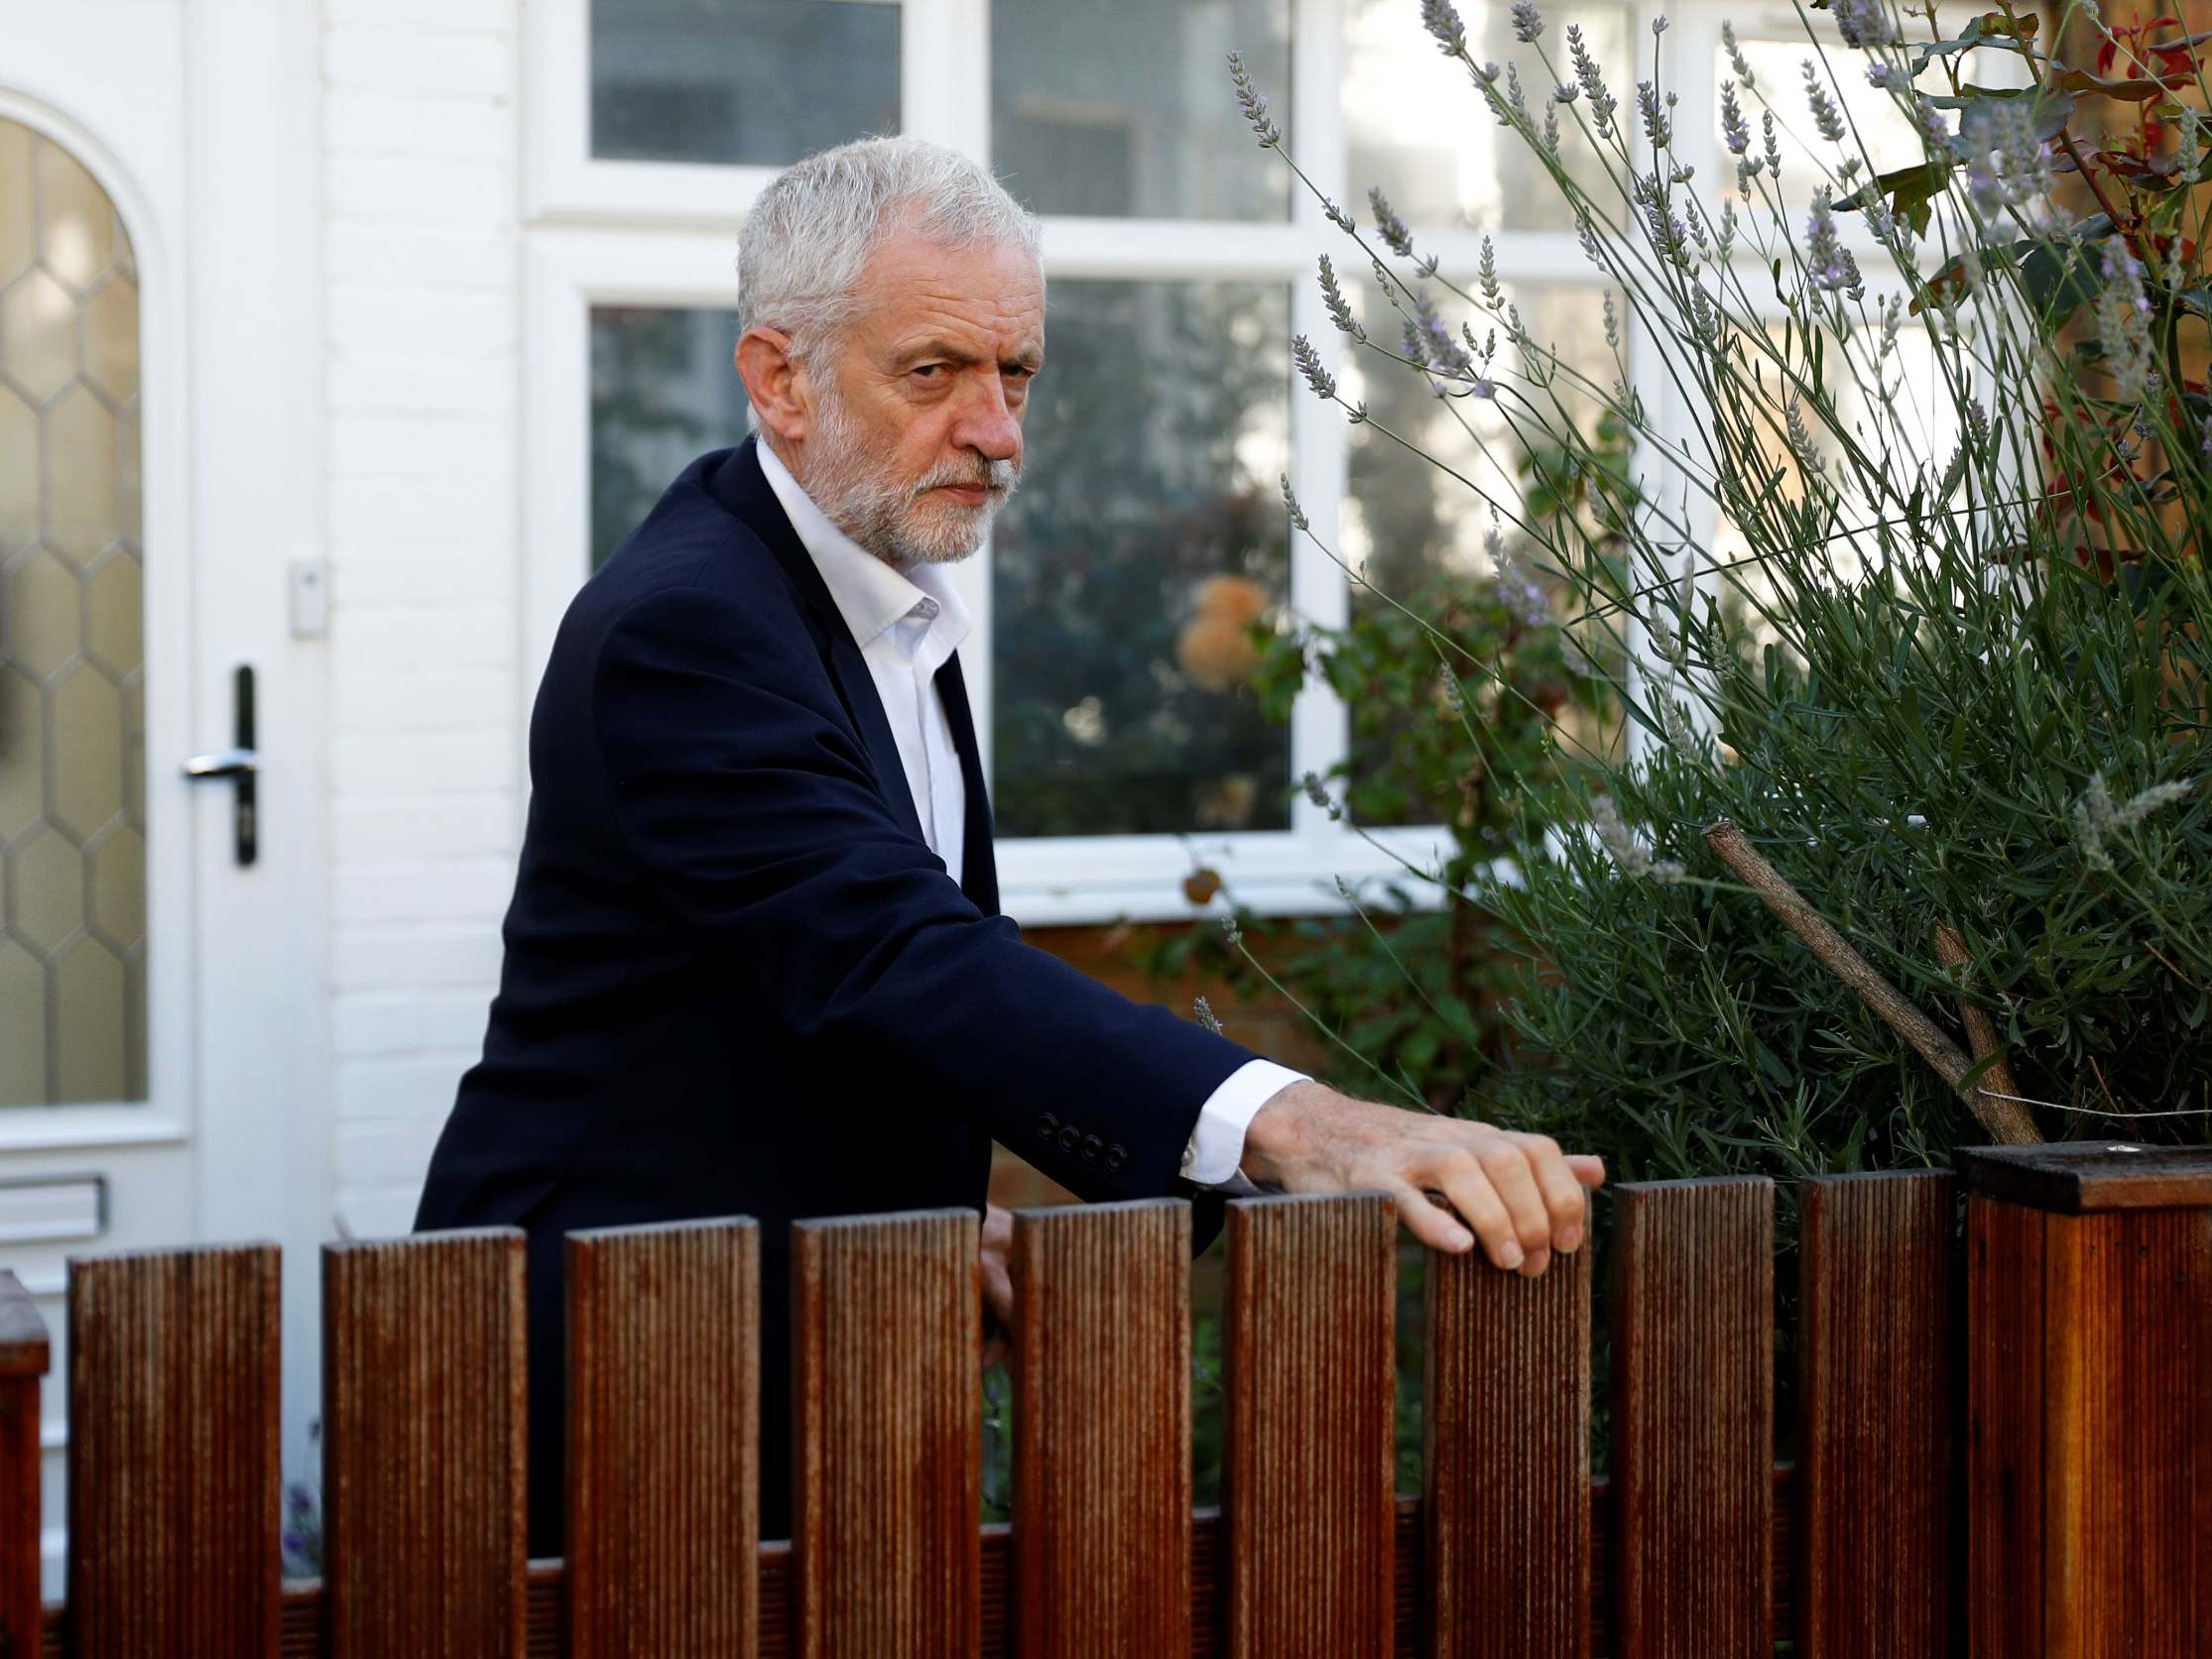 Corbyn has been asked time and again to announce full-blooded Brexit policies